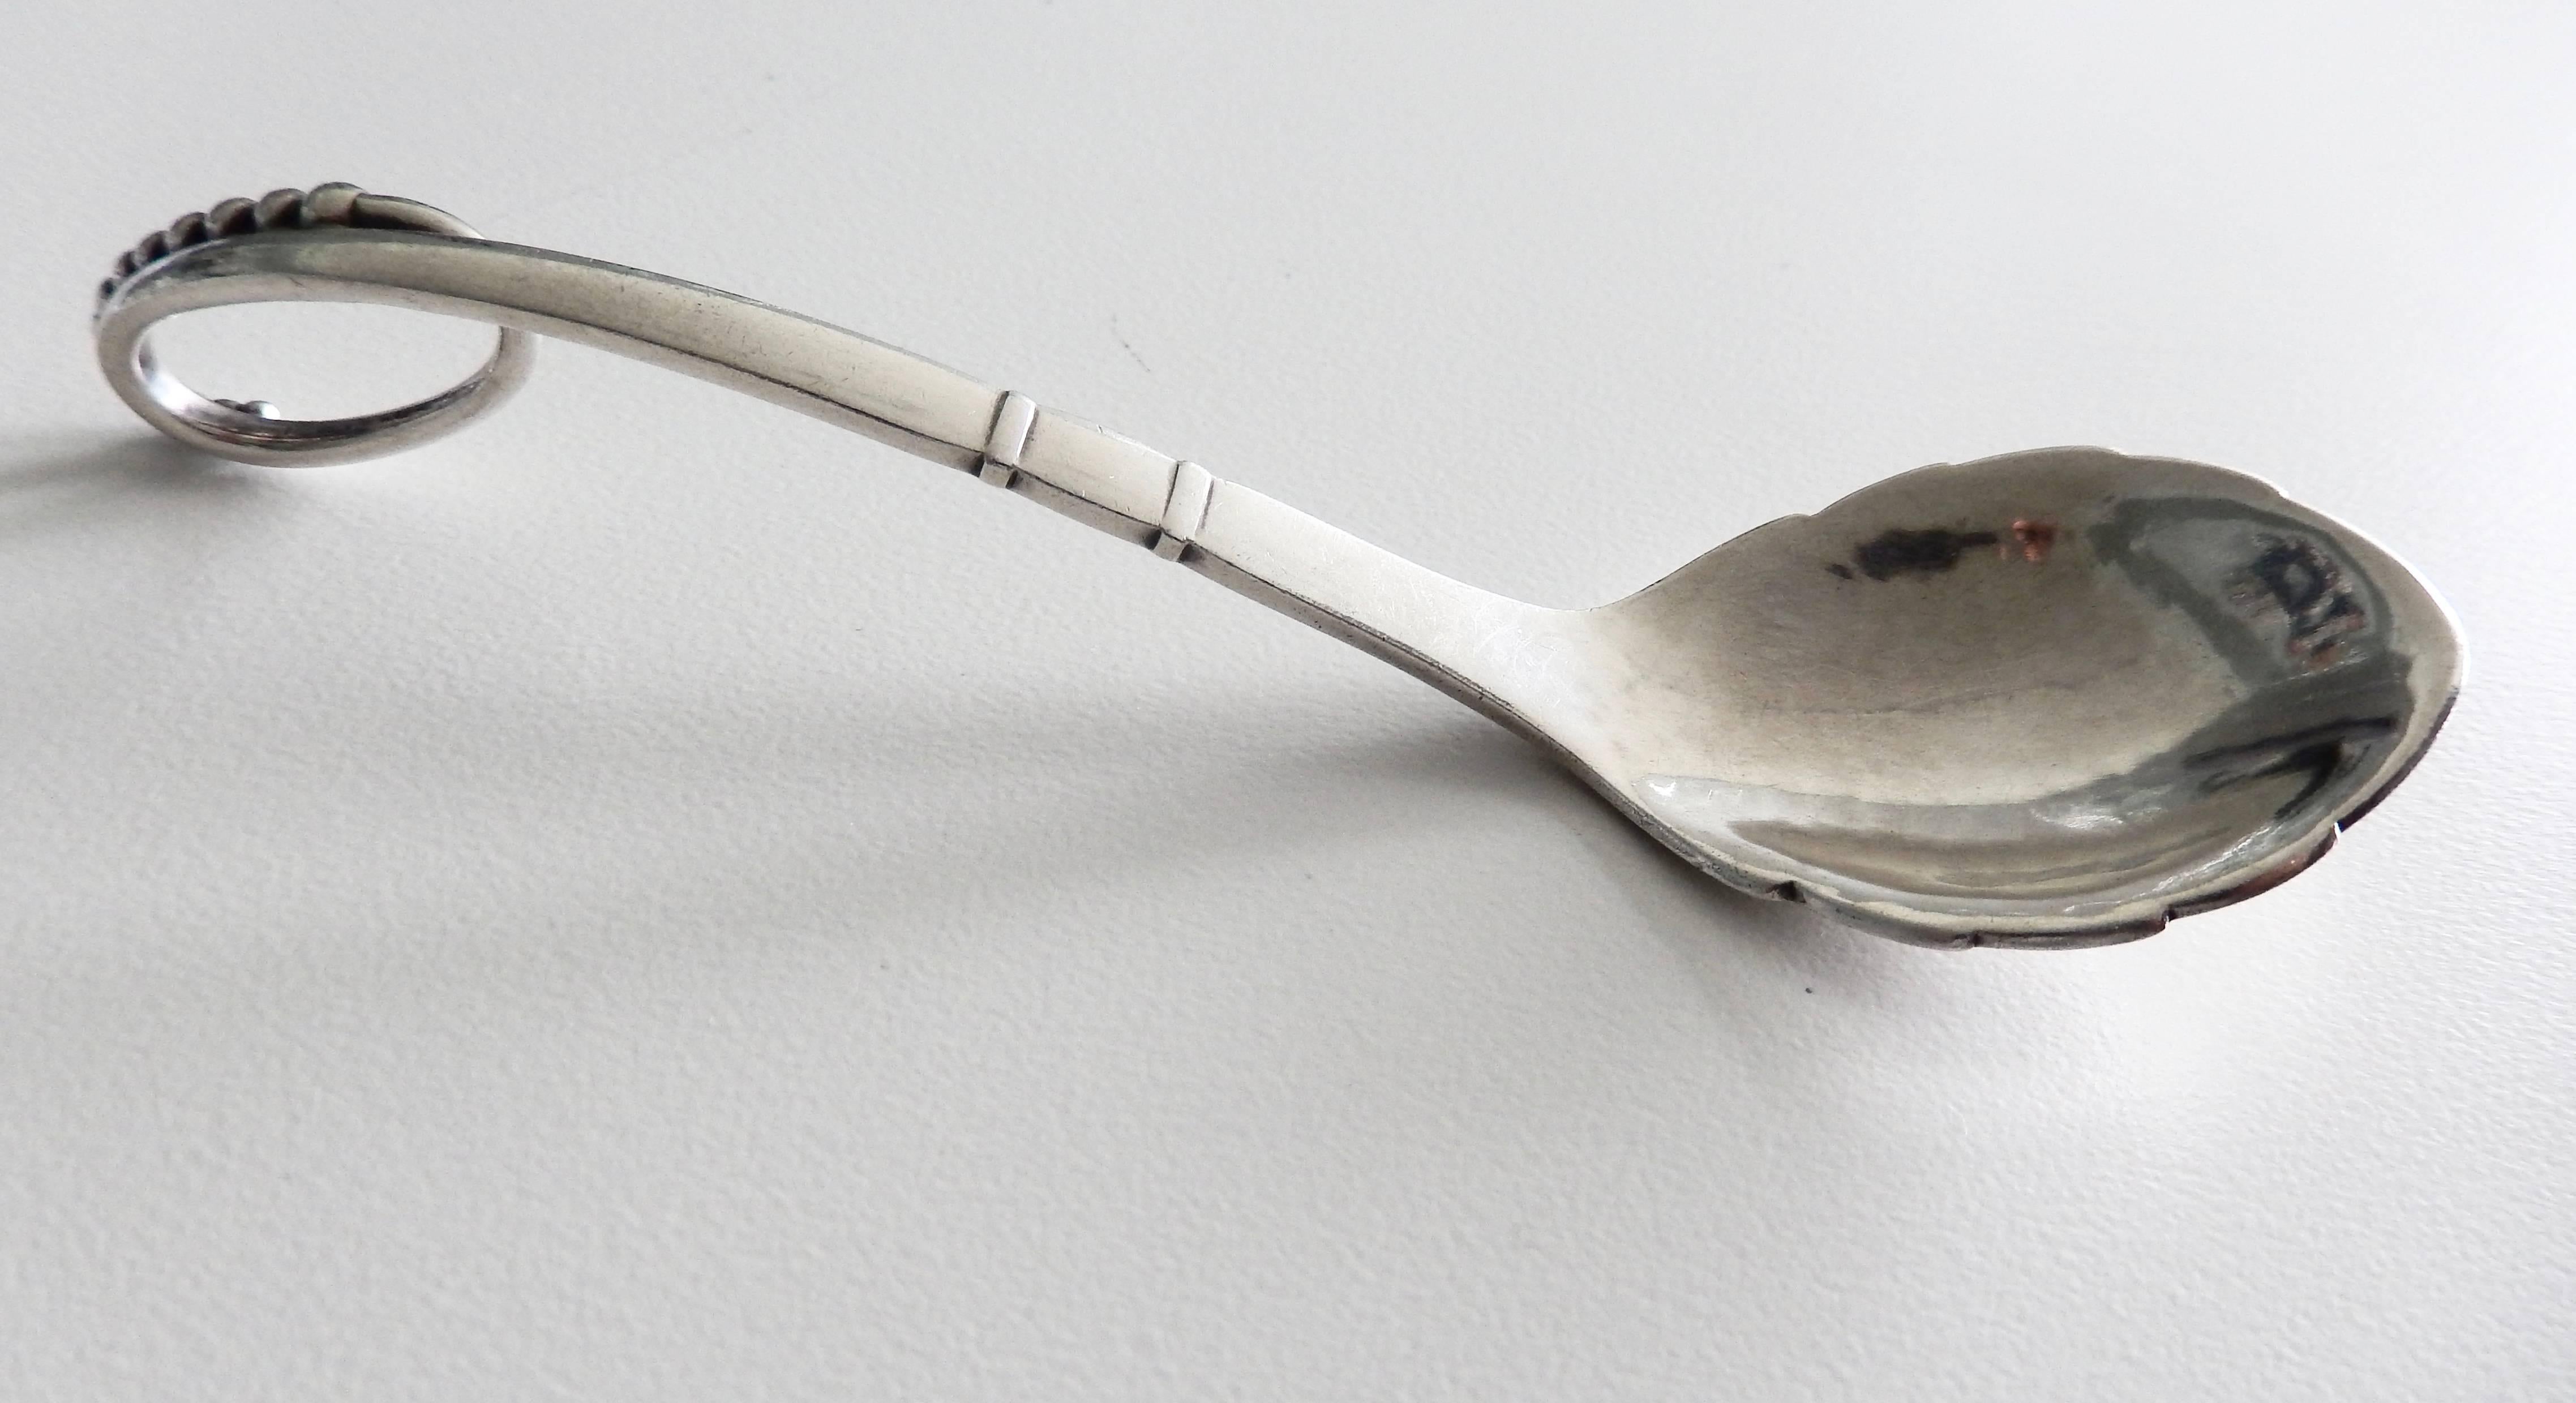 A beautiful example of Jensen's scalloped, sterling silver sugar spoon, #41, with a curved handle. An elegant, graceful form with fine detailing. Marked.